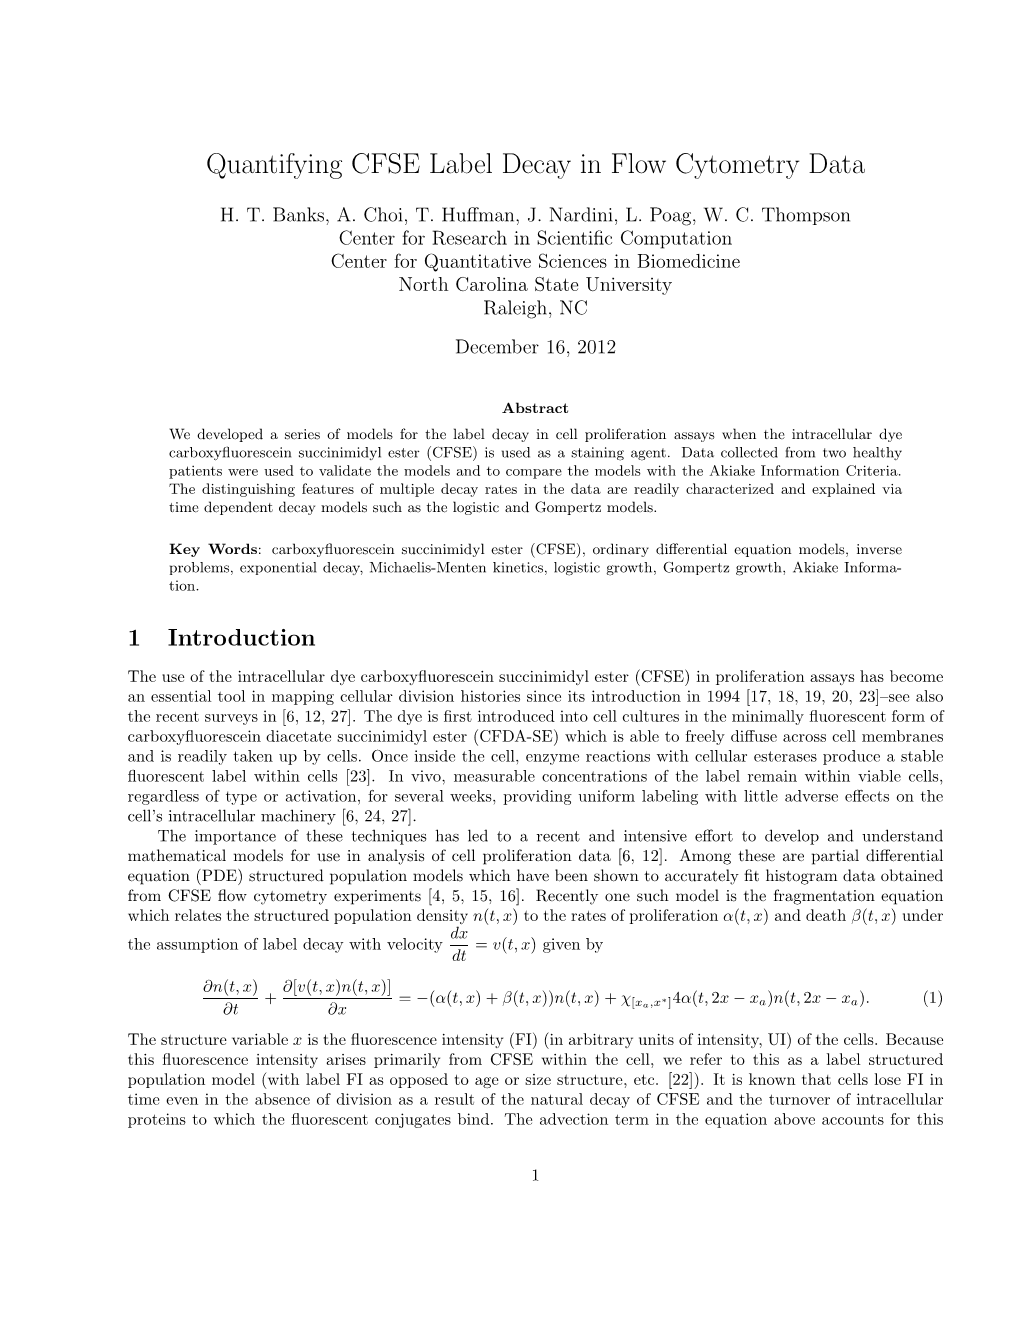 Quantifying CFSE Label Decay in Flow Cytometry Data